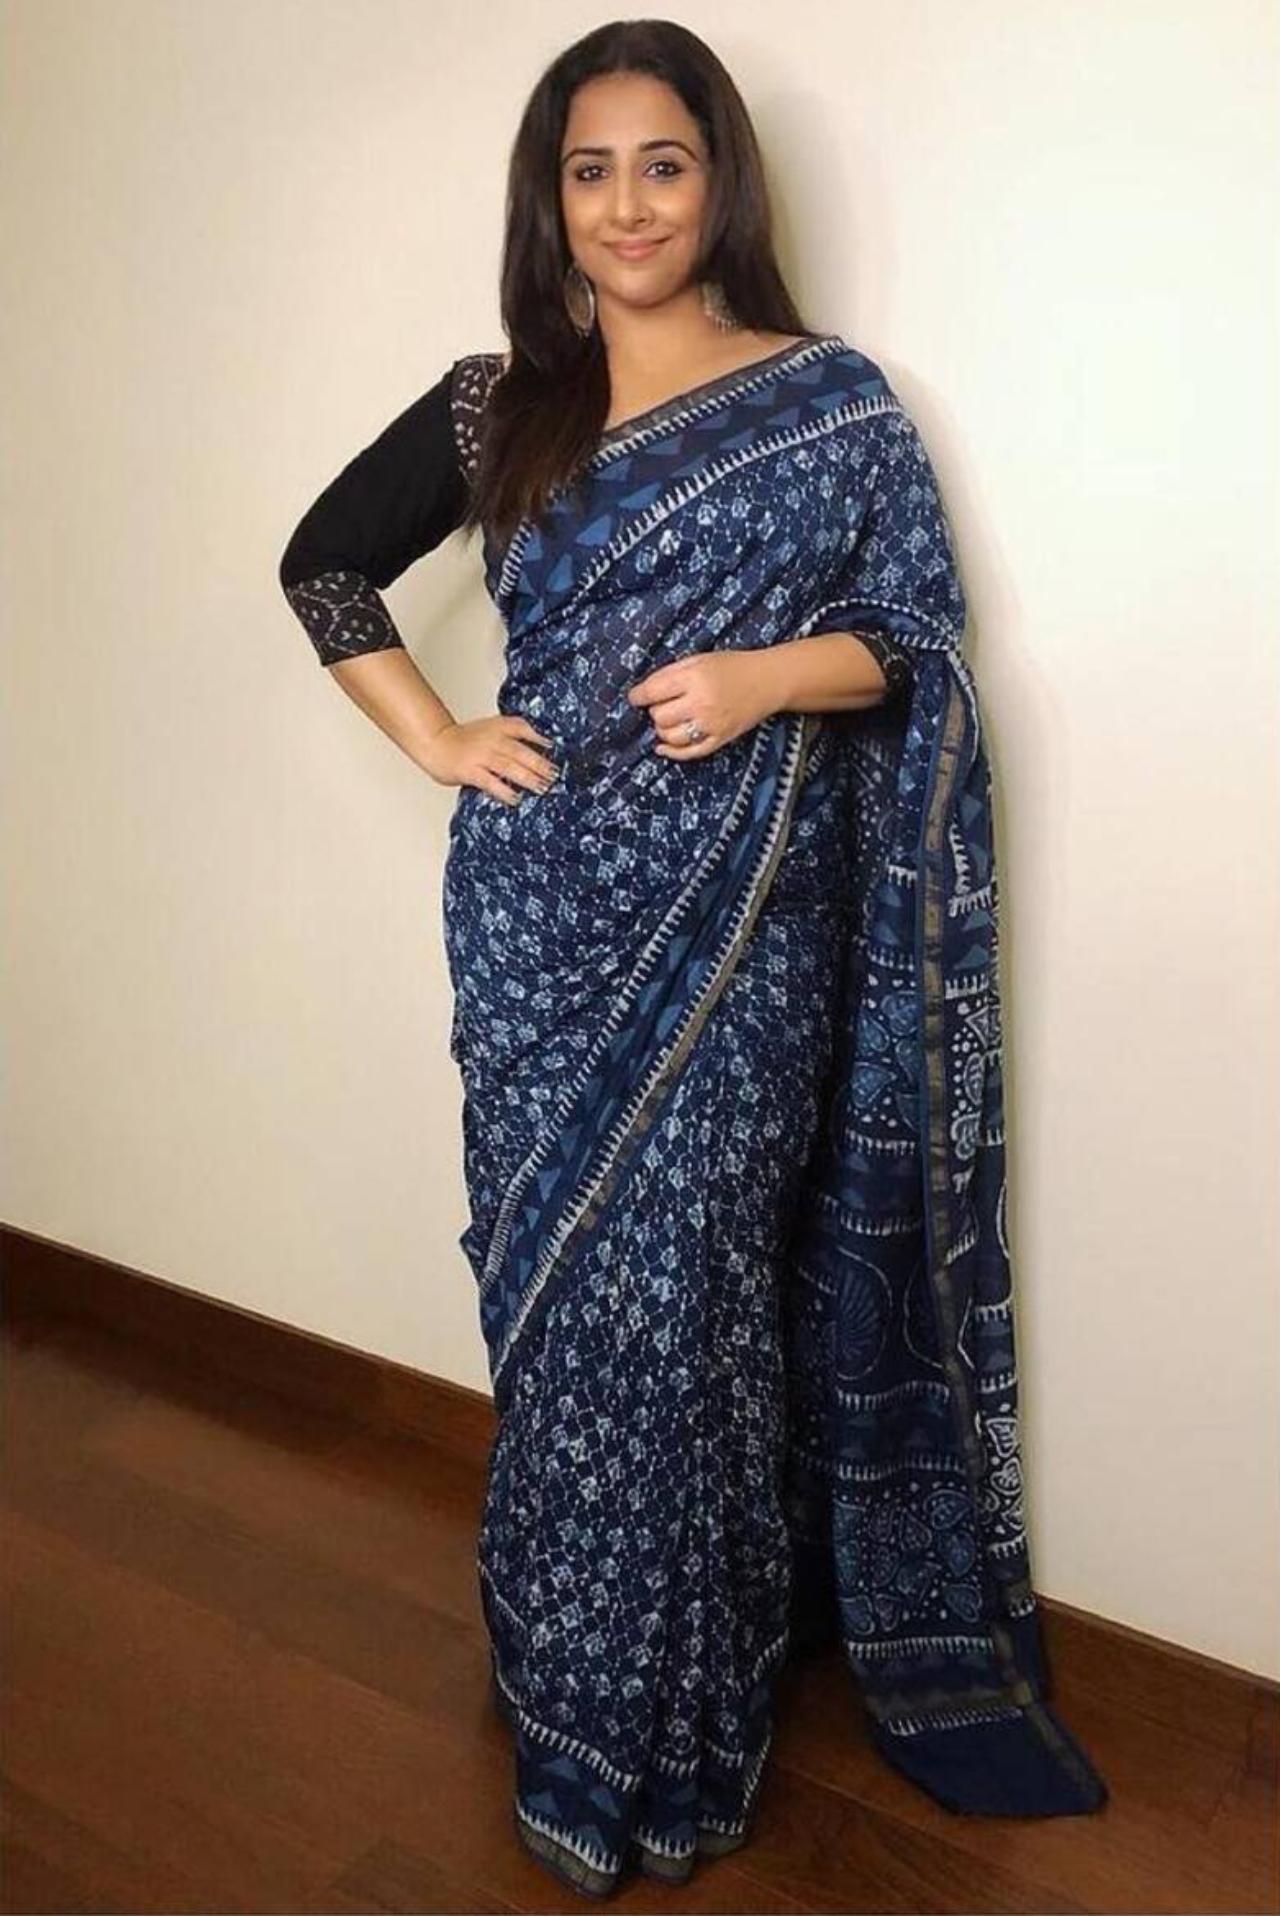 Want to wear blue to work this festive season? Vidya Balan-inspired blue printed cotton saree is perfect piece to get inspiration from